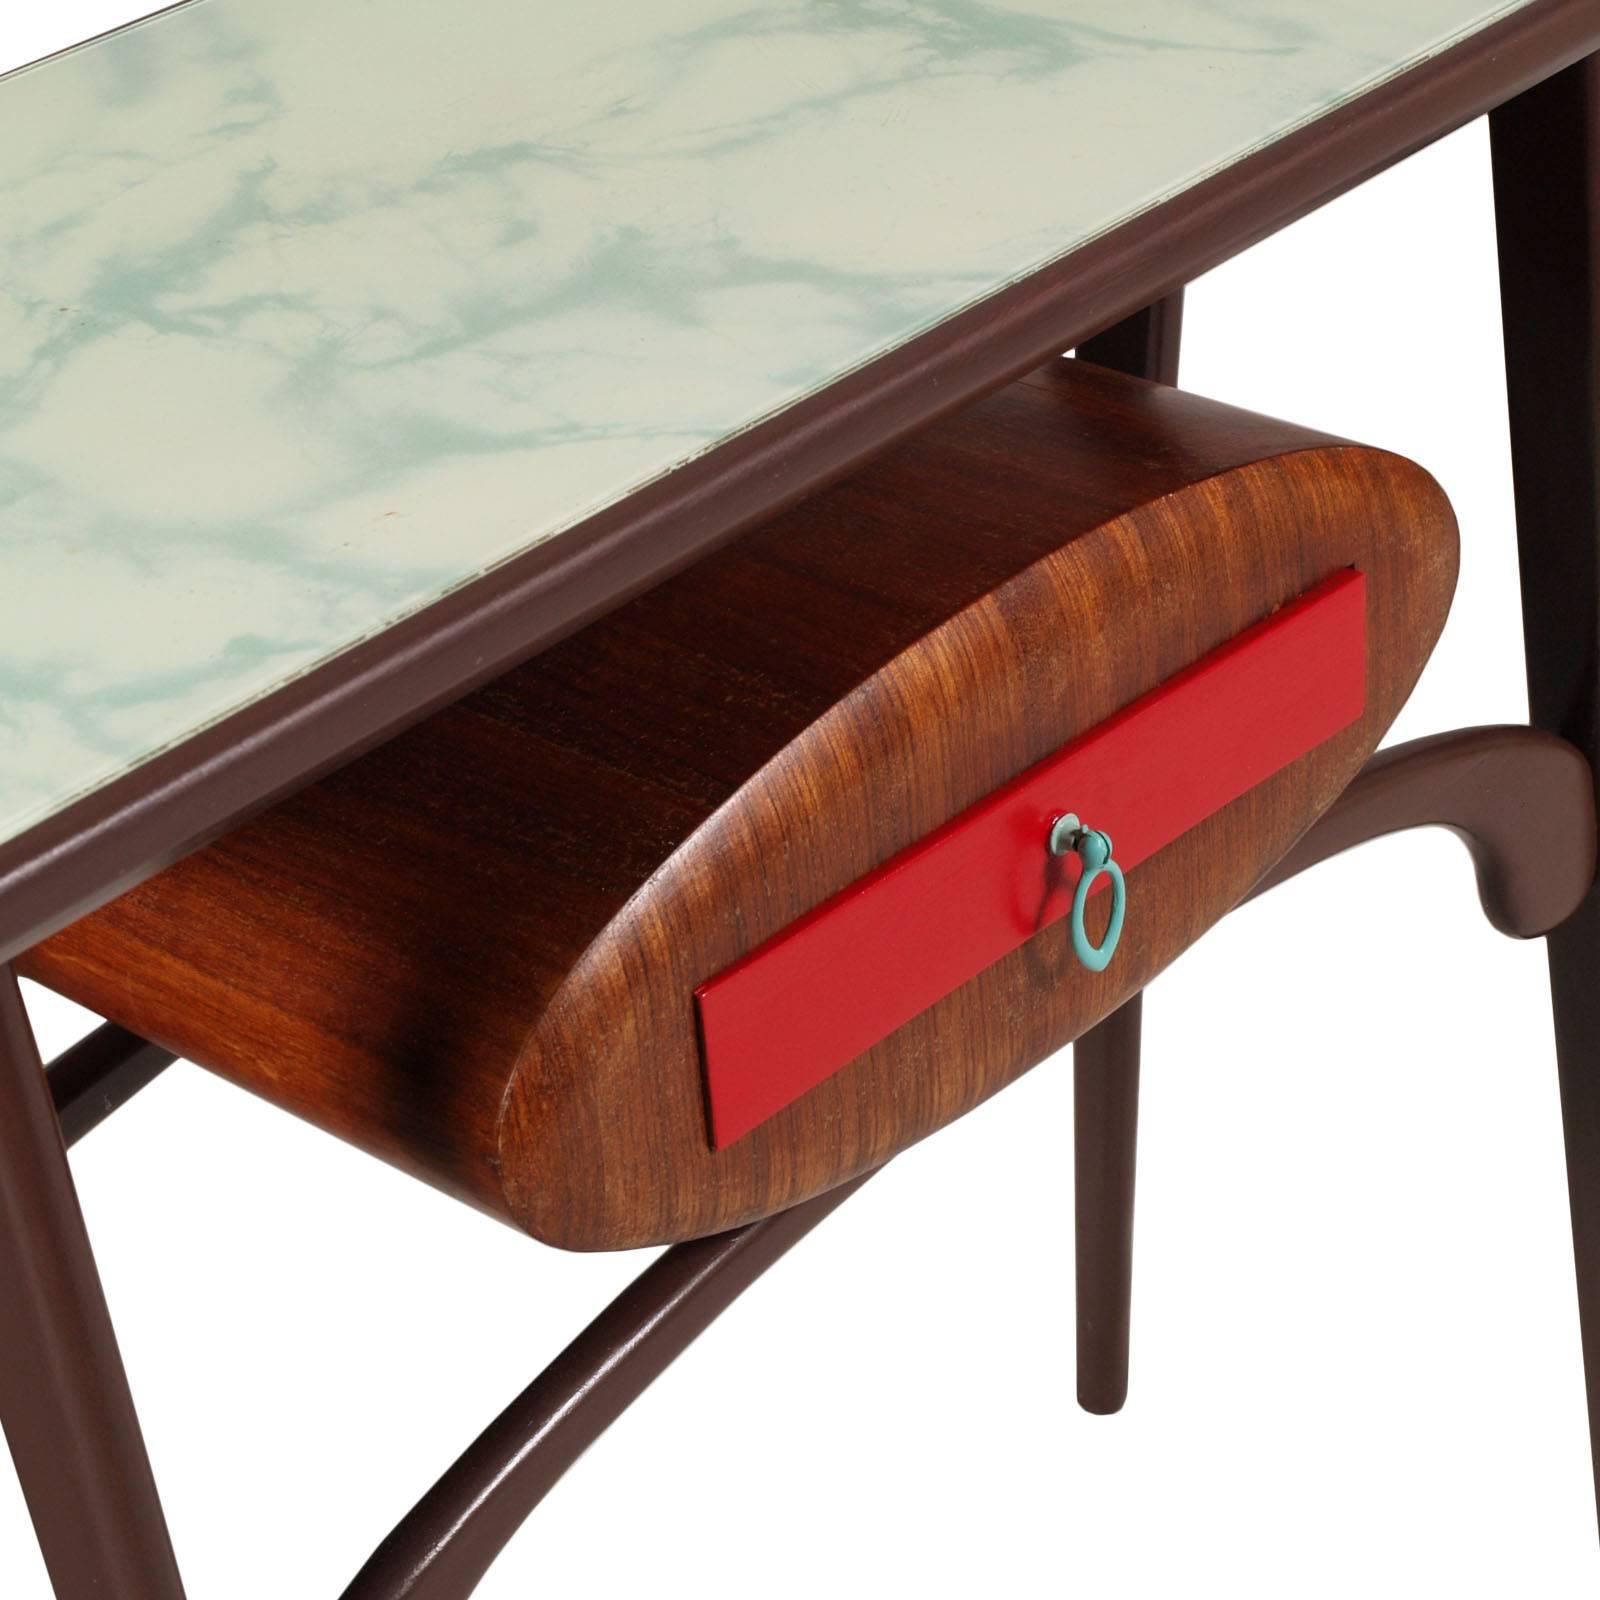 Console Mid-Century Modern Carlo Mollino style, wood lacquered, top crystal decorated marble, with dresser
Elliptical central container of wax-polished walnut

Measures cm: H 82 x W 90 x D 36

About Carlo Mollino
Carlo Mollino was a Master of